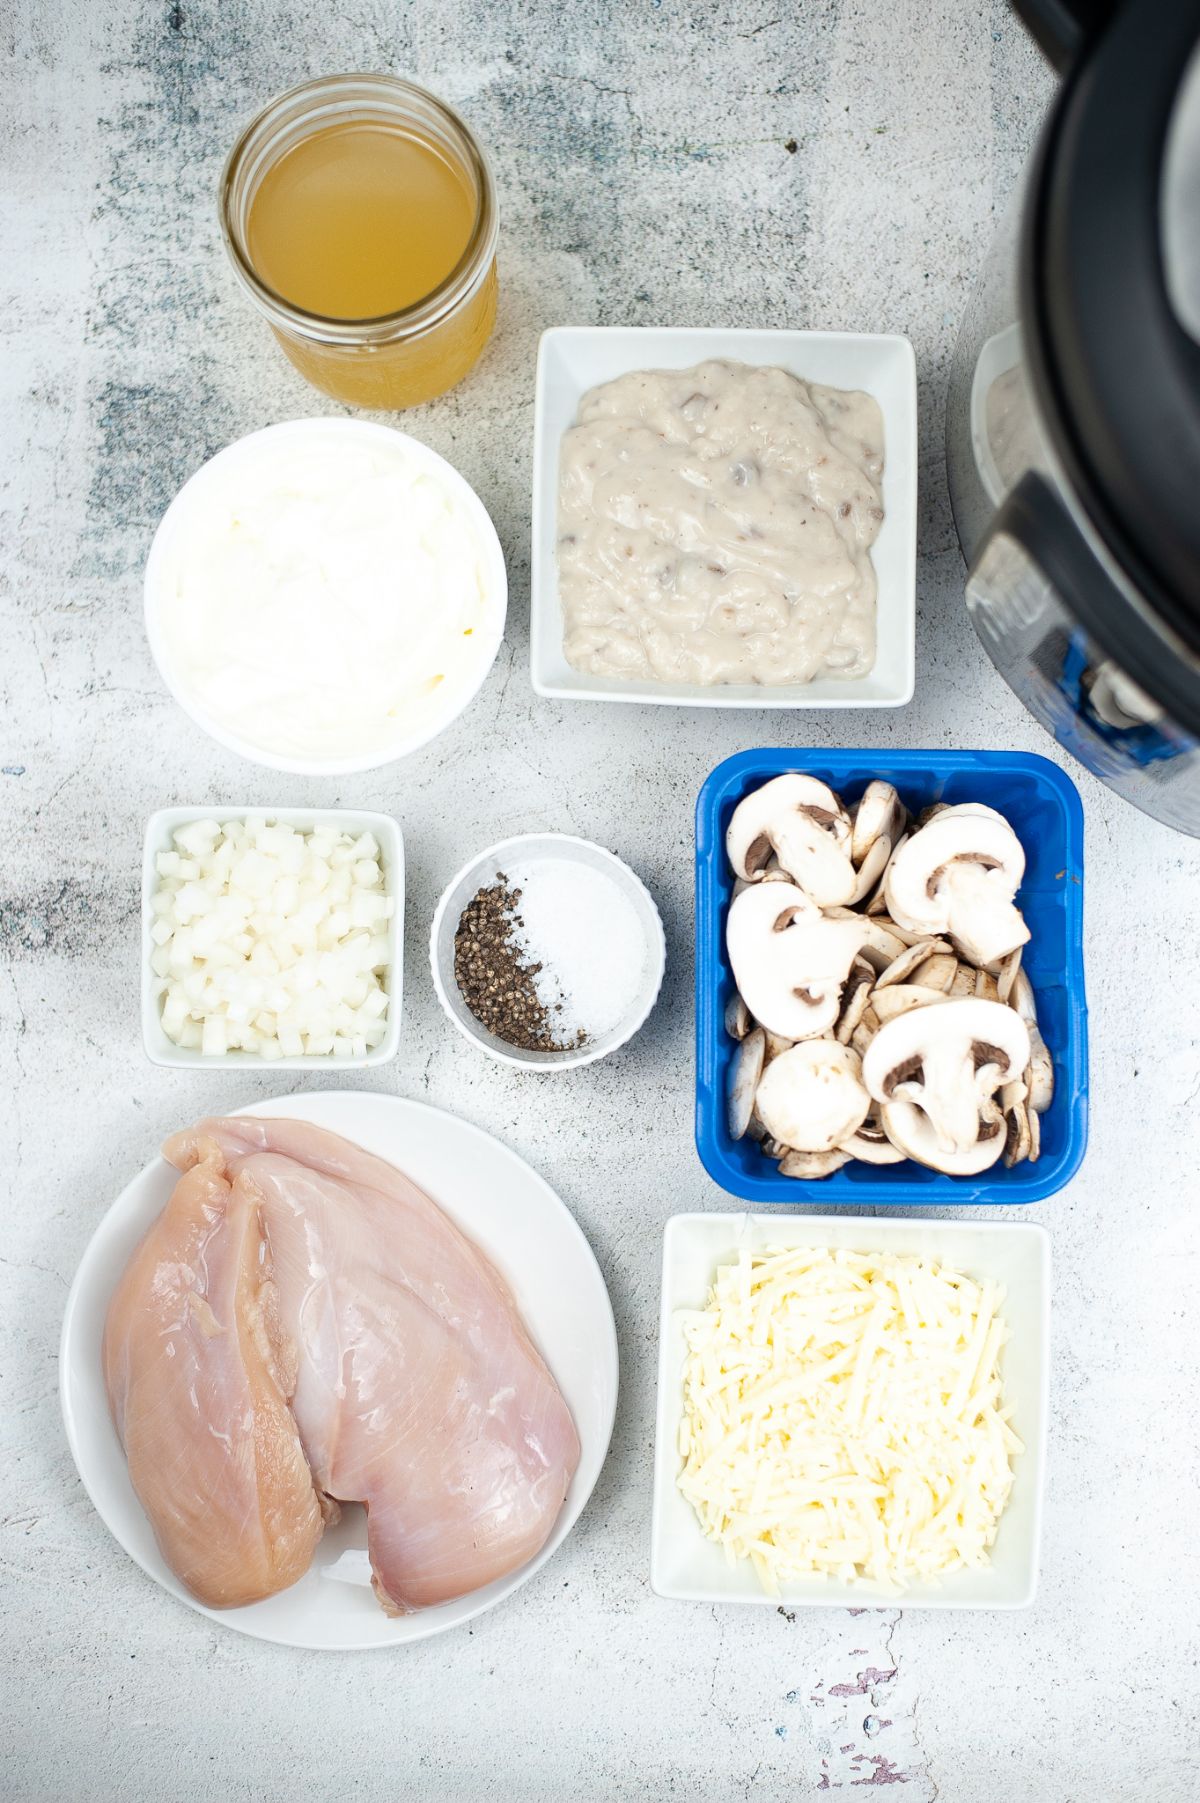 Ingredients used to make Instant Pot Chicken Tetrazzini.